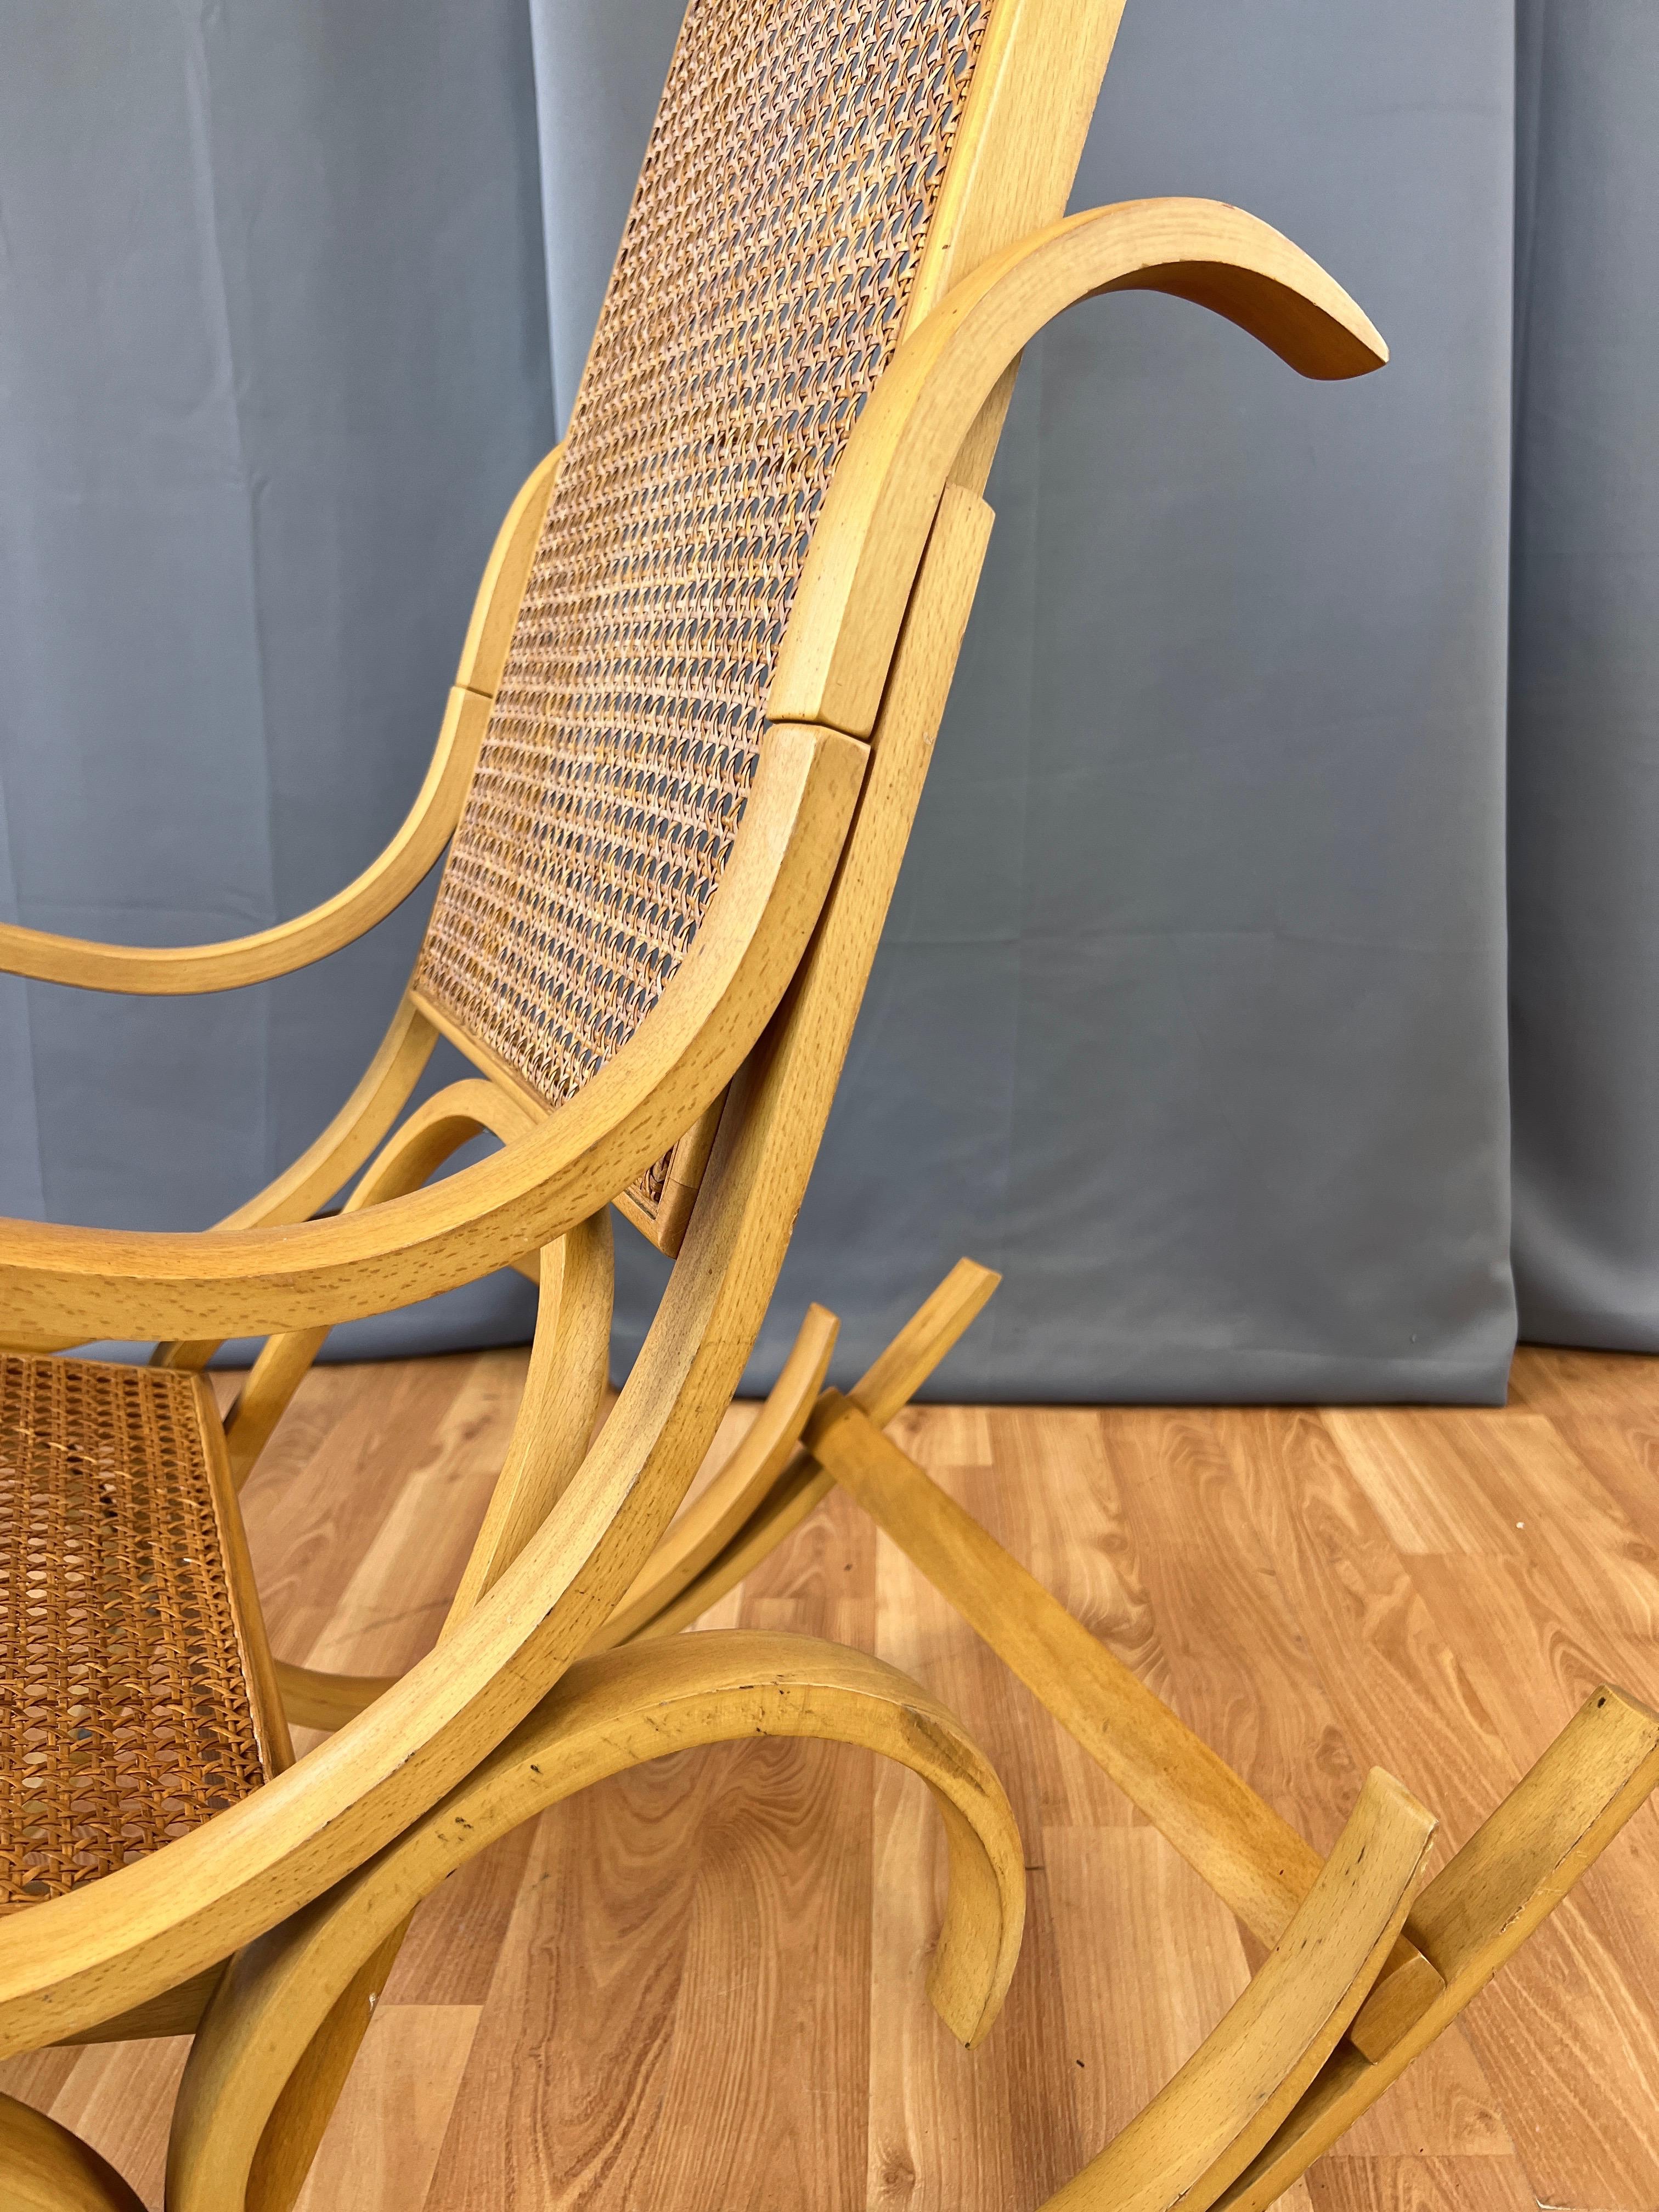 Luigi Crassevig Italian Bentwood Rocking Chair with Woven Cane Seat, 1970s For Sale 6